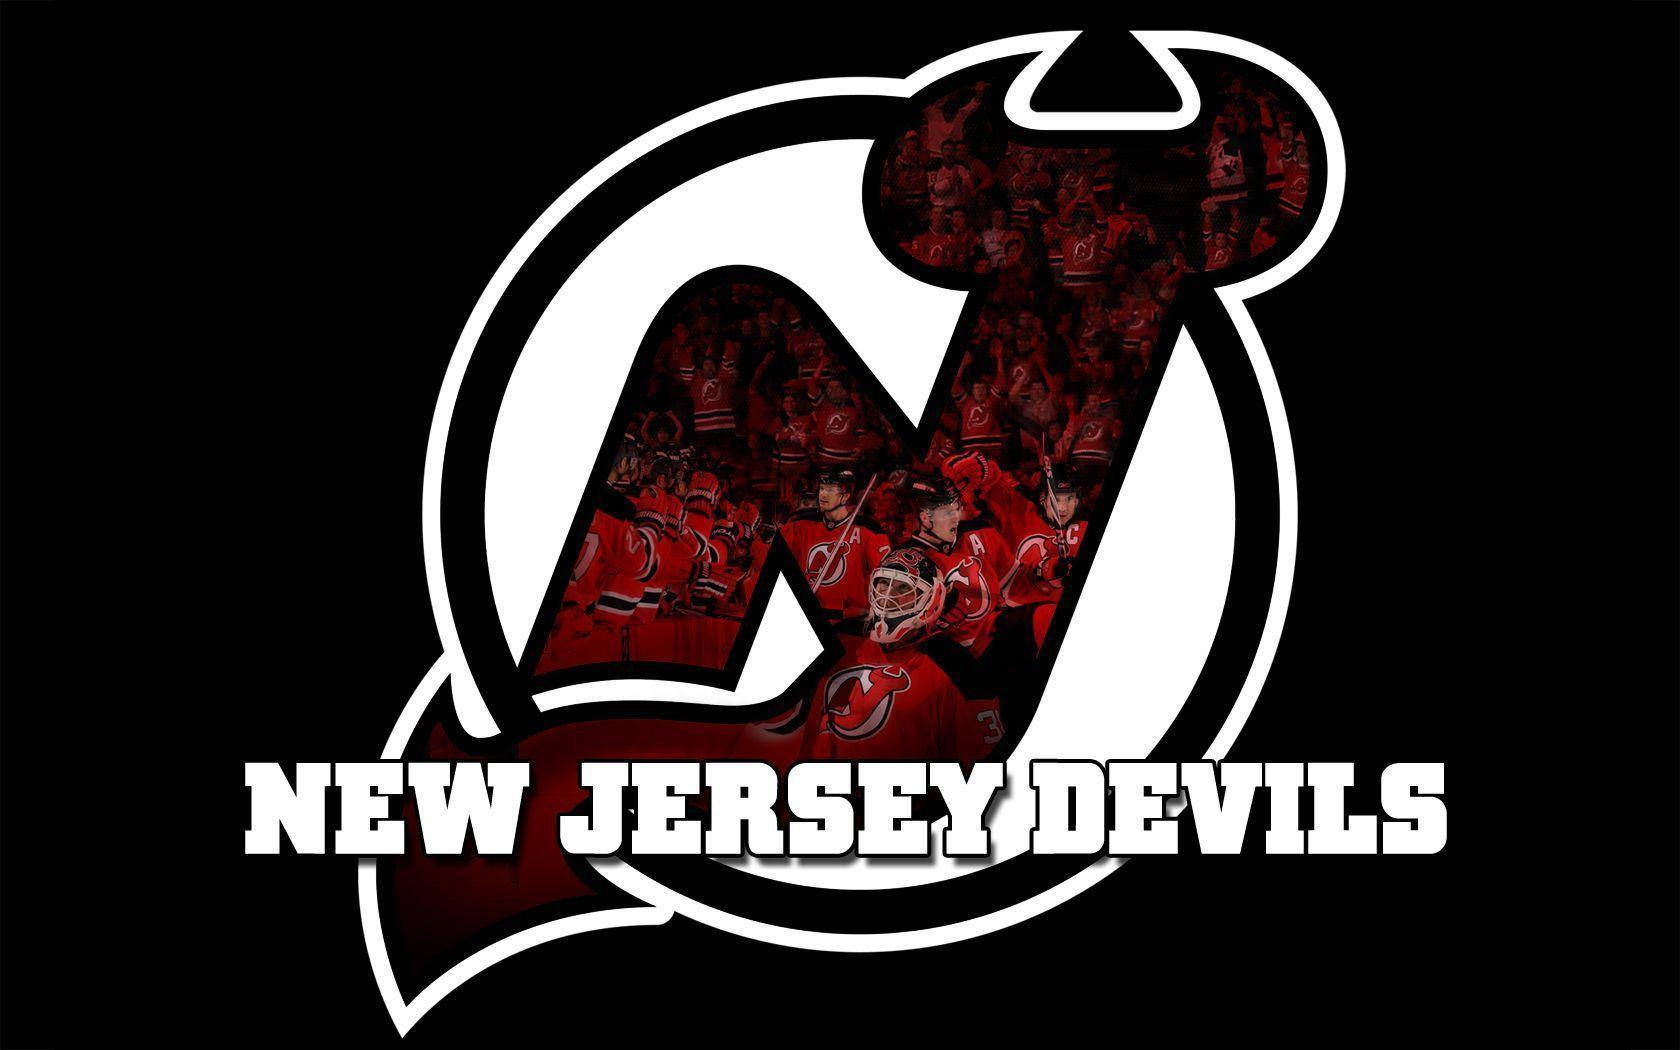 Community Event Hosted by the New Jersey Devils Wallpaper